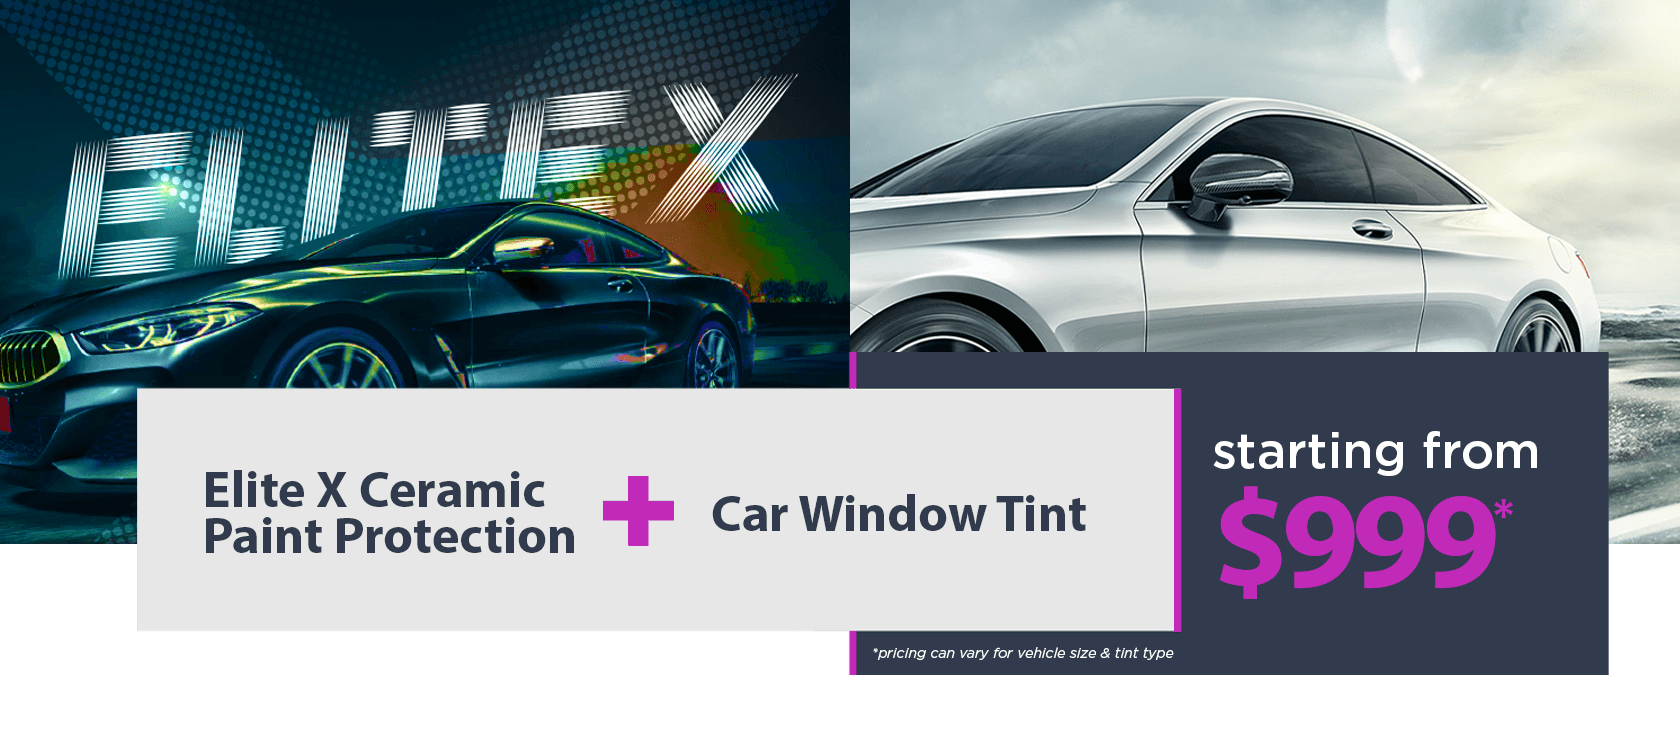 EliteX + Tint $999 Special Offer